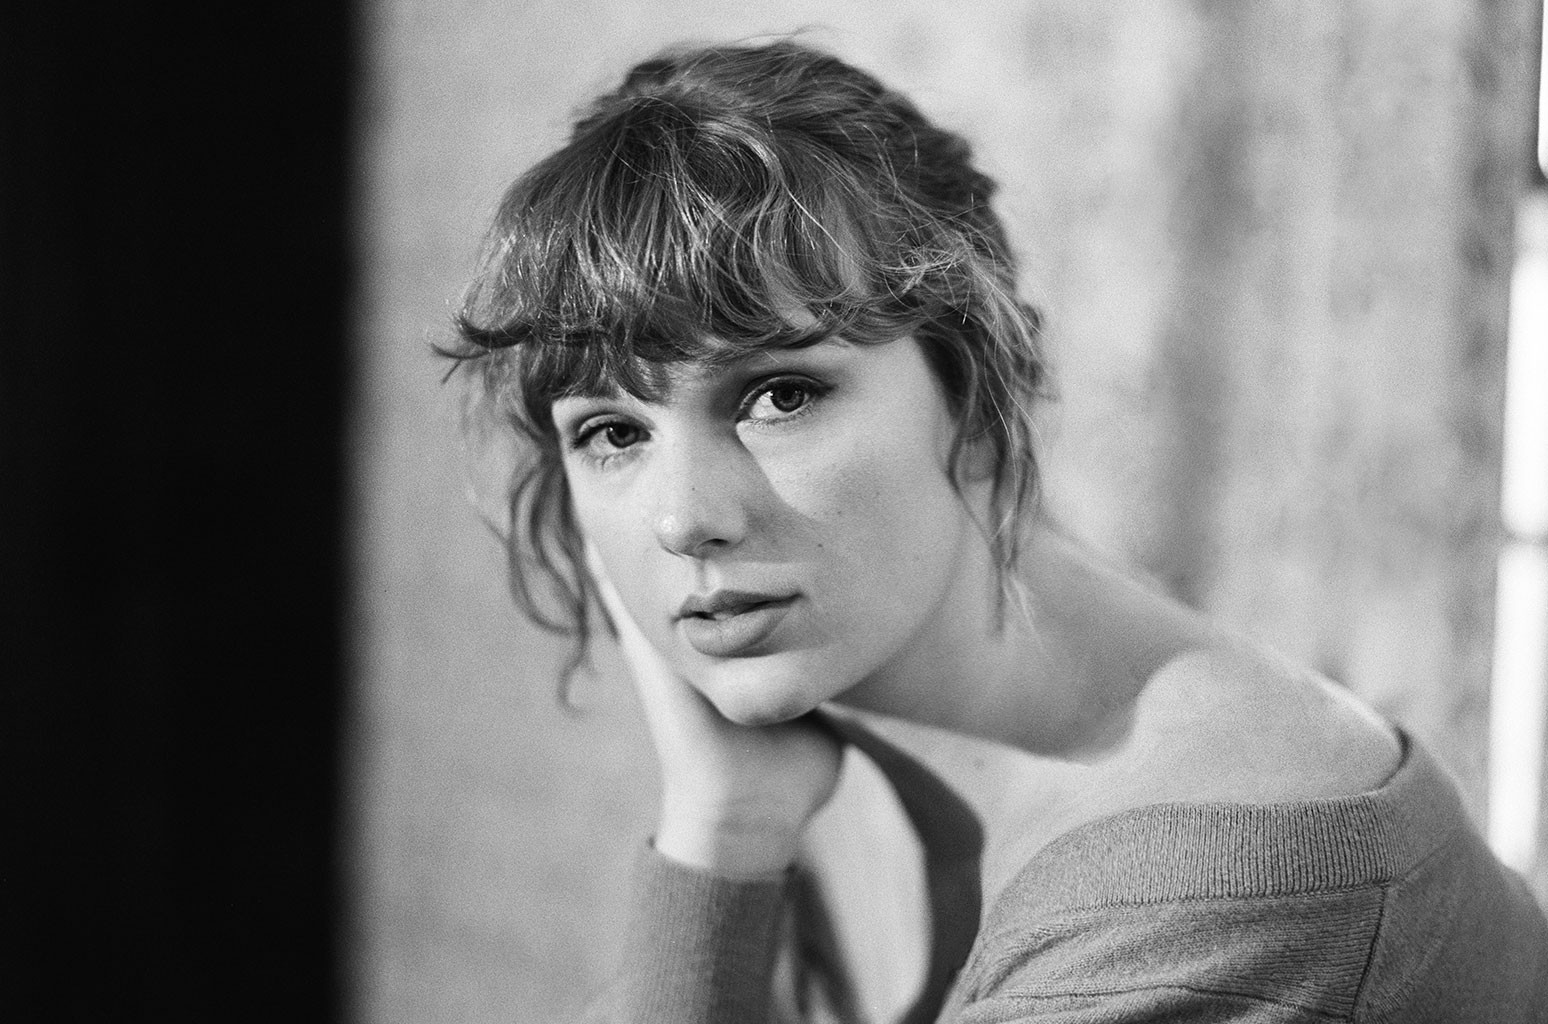 Taylor Swift "Evermore" returned to number one for Week 3 on the Billboard 200 chart